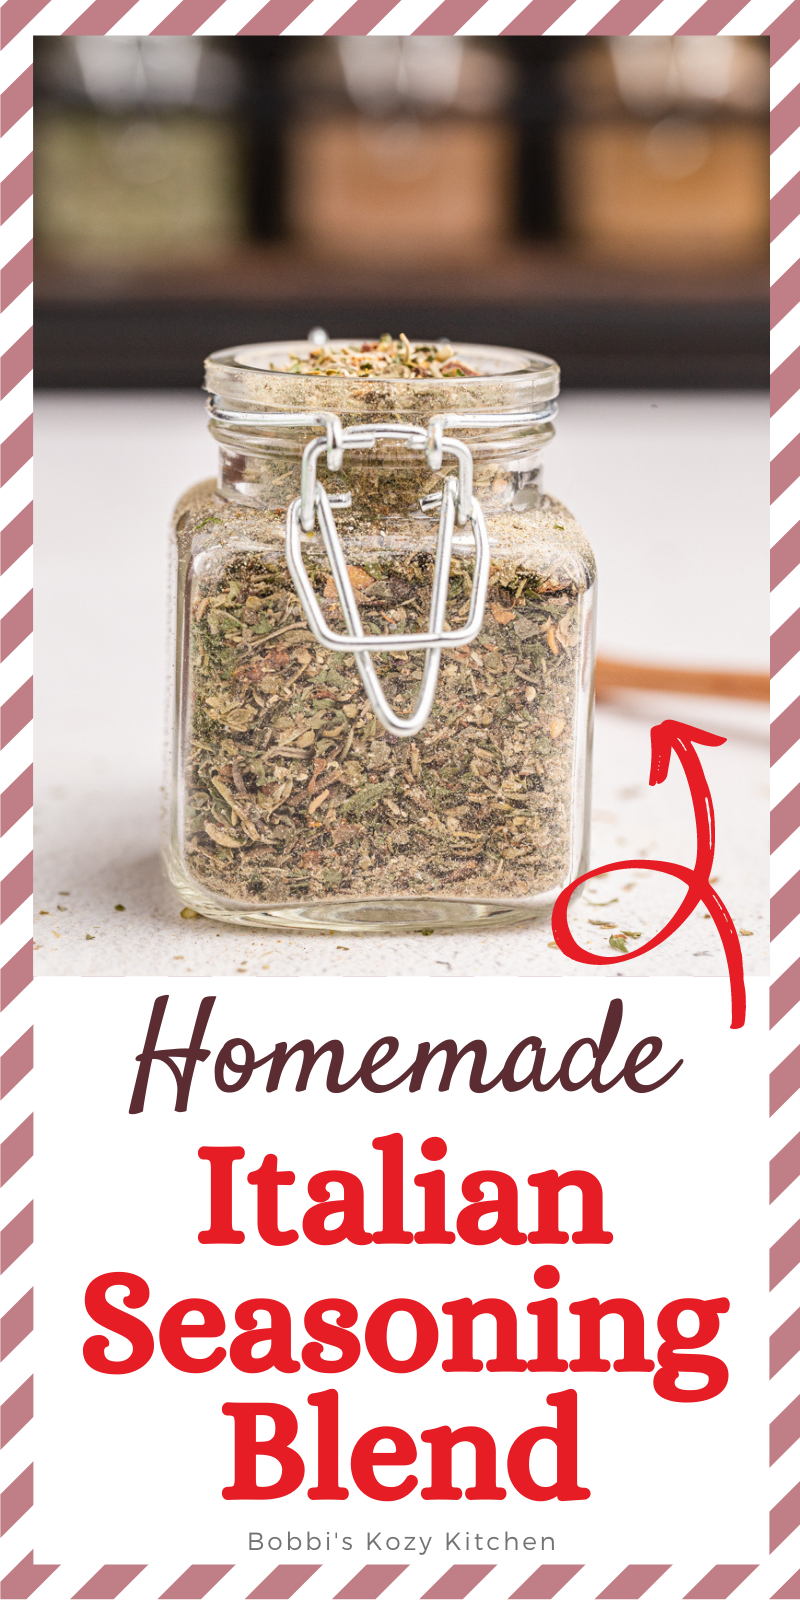 The Best Homemade Italian Seasoning - This Homemade Italian Seasoning is so easy to make and better than any store-bought seasoning. It is a must-have in your pantry, trust me! I use this Italian Seasoning in just about everything! #diy #homemade #seasoning #spice #blend #keto #lowcarb #glutenfree #recipe